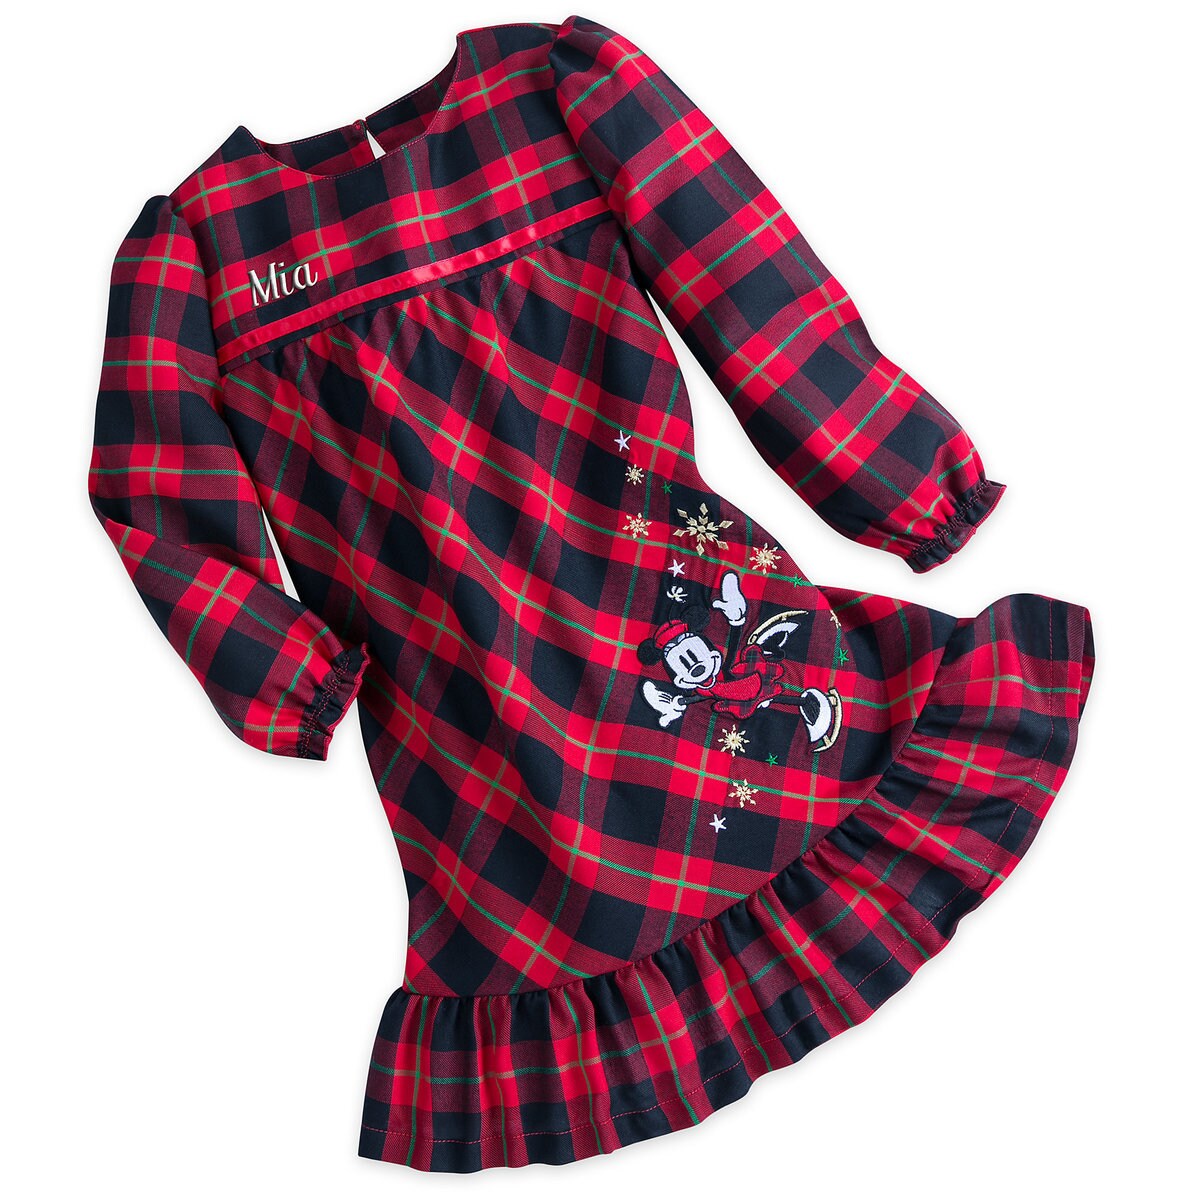 Minnie Mouse Holiday Plaid Nightshirt for Girls - Personalizable